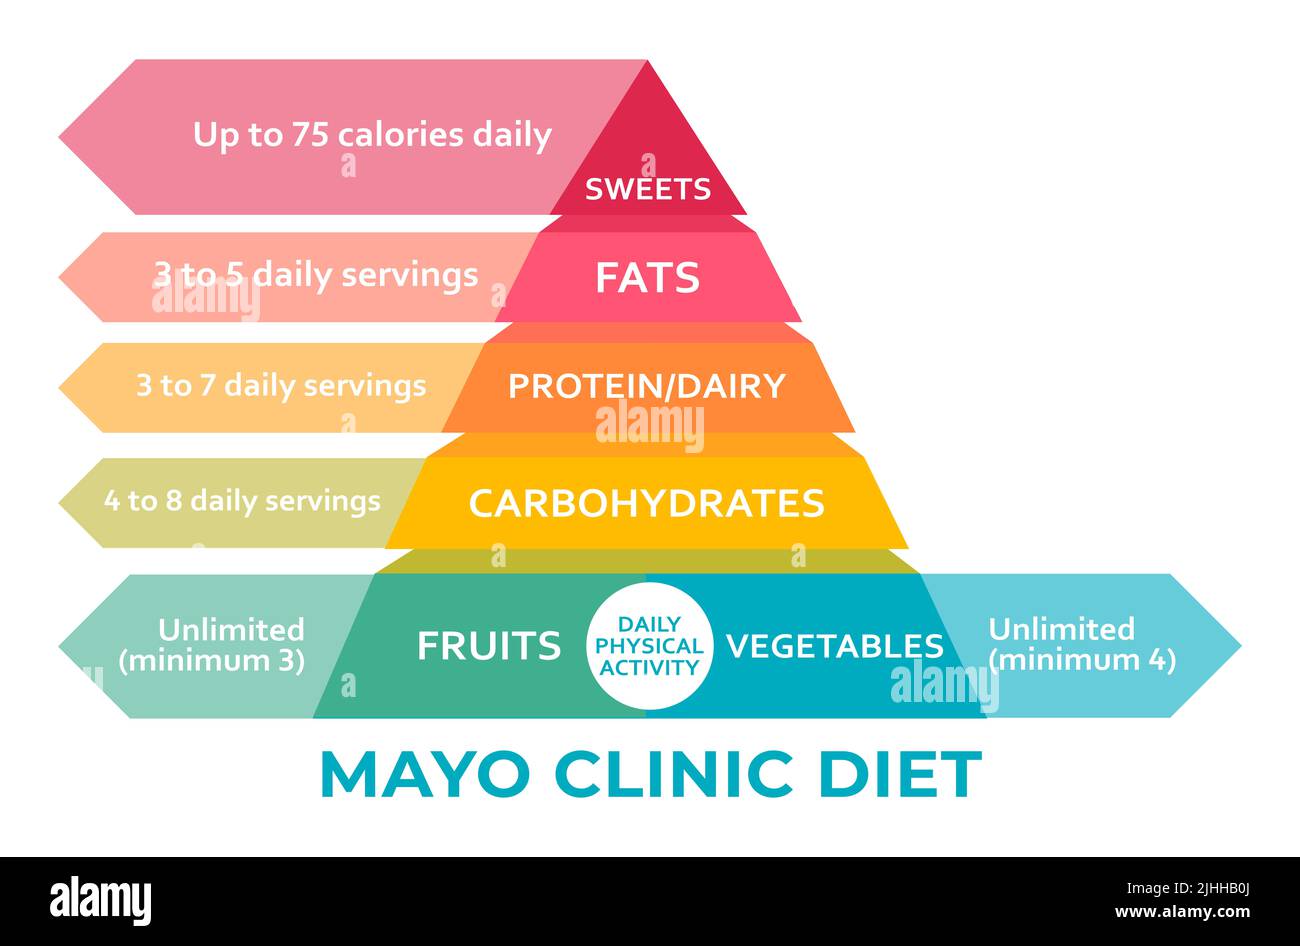 https://c8.alamy.com/comp/2JHHB0J/mayo-clinic-healthy-weight-pyramid-chart-healthy-eating-healthcare-dieting-concept-unlimited-amounts-of-vegetables-and-fruits-2JHHB0J.jpg